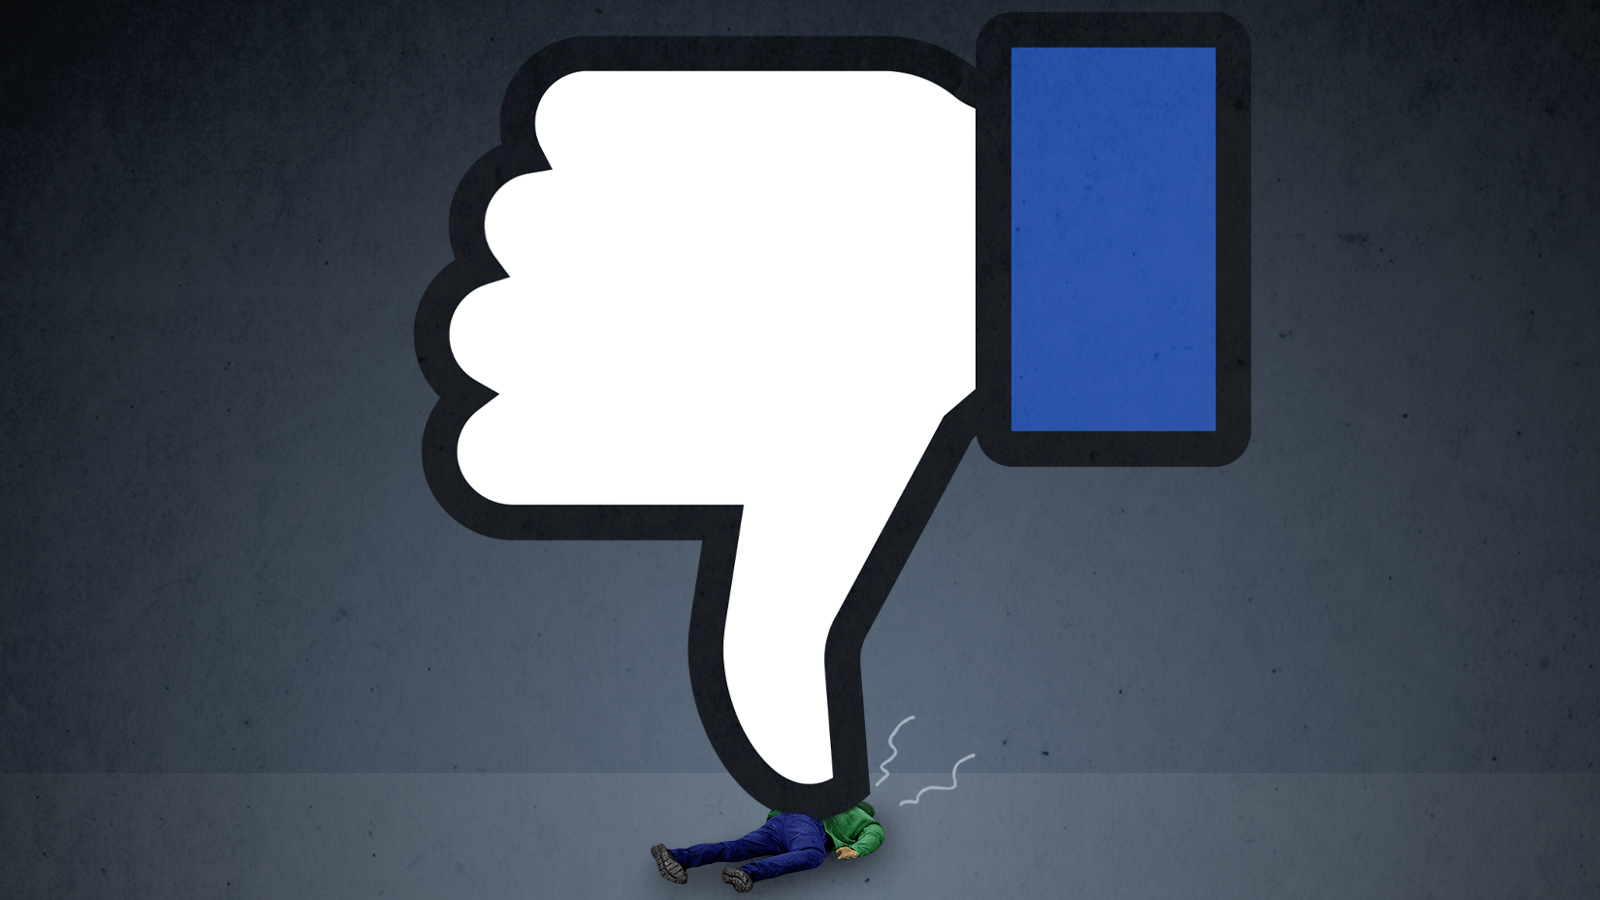 The Facebook thumb.